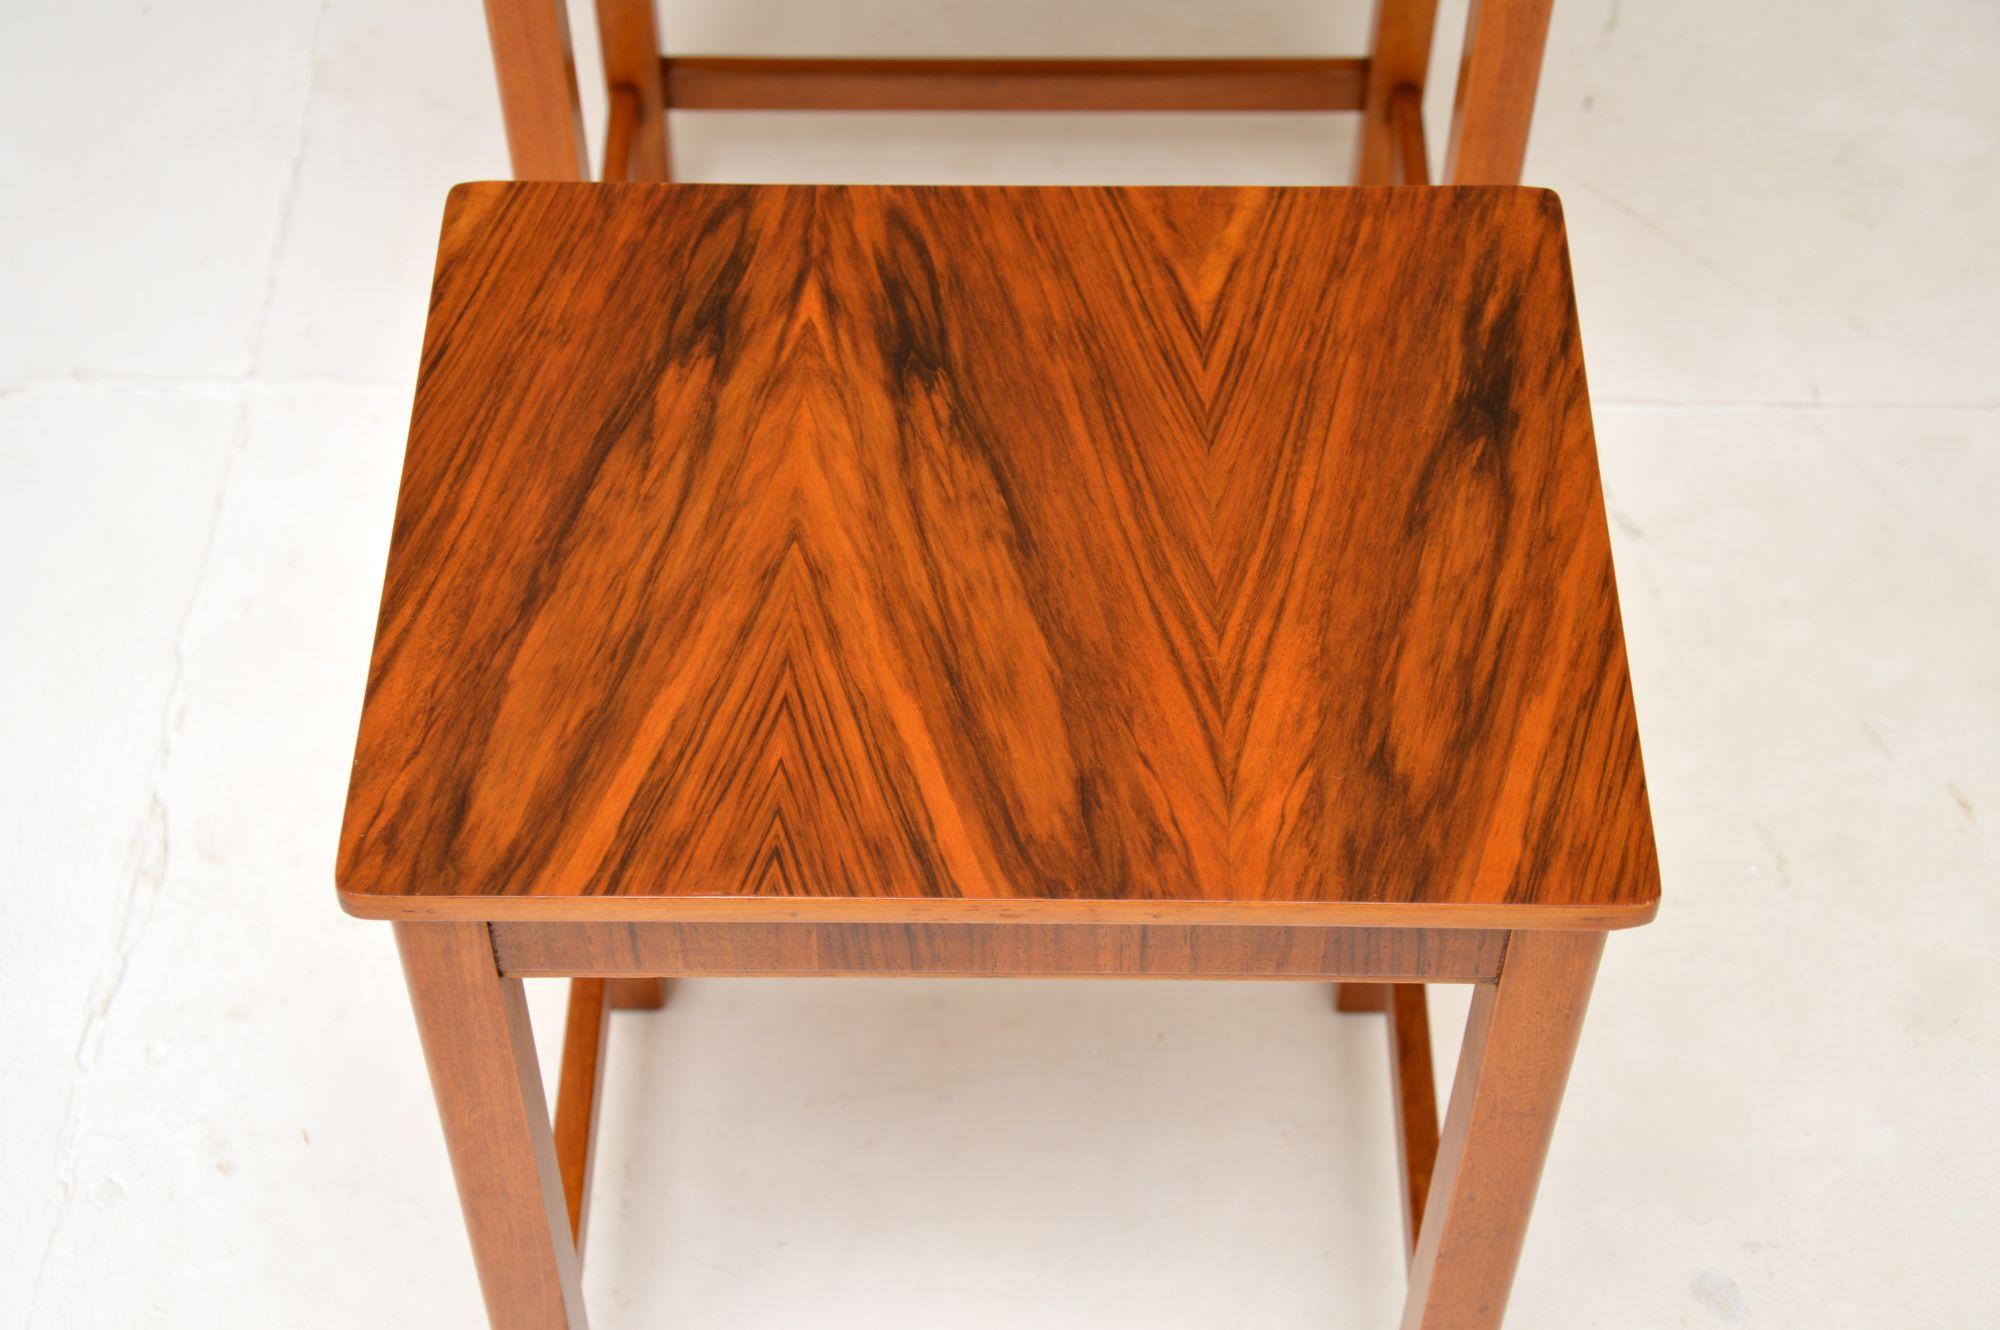 1920's Art Deco Figured Walnut Nest of Tables For Sale 7